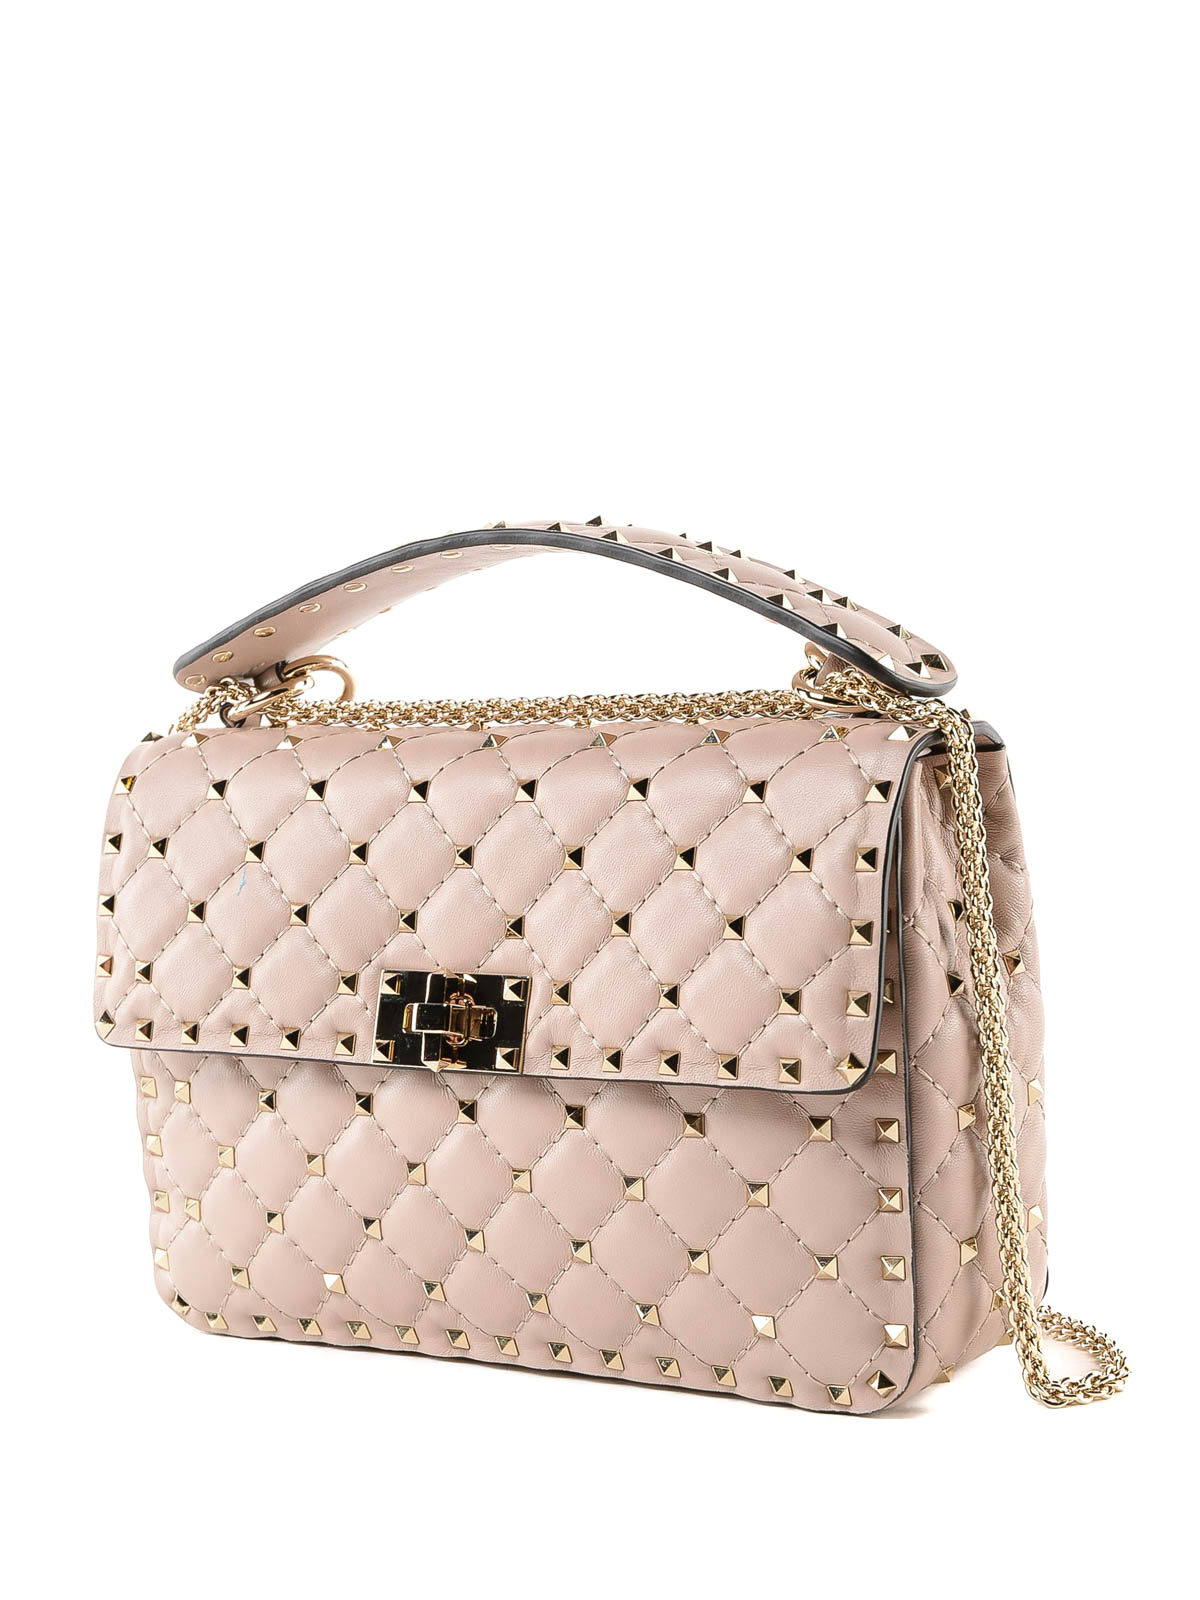 Valentino Rockstud Spike Quilted Leather Crossbody Chain Bag Poudre